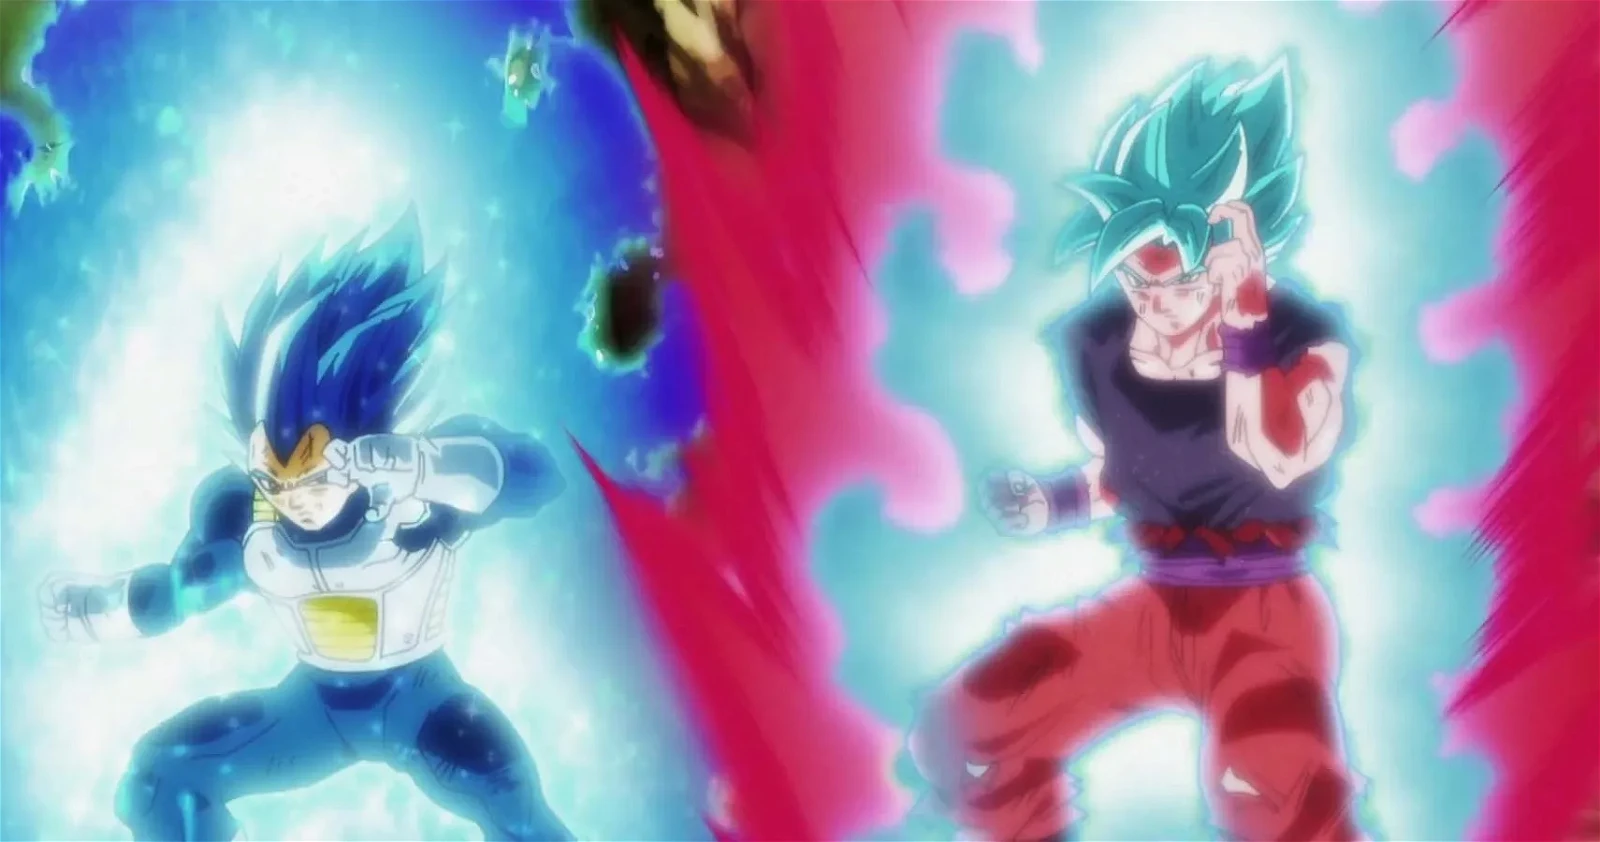 Ultra Ego Vegeta vs Ultra Instinct Goku- Who Wins This Ultimate Face-Off  That Can Destroy Planets - FandomWire